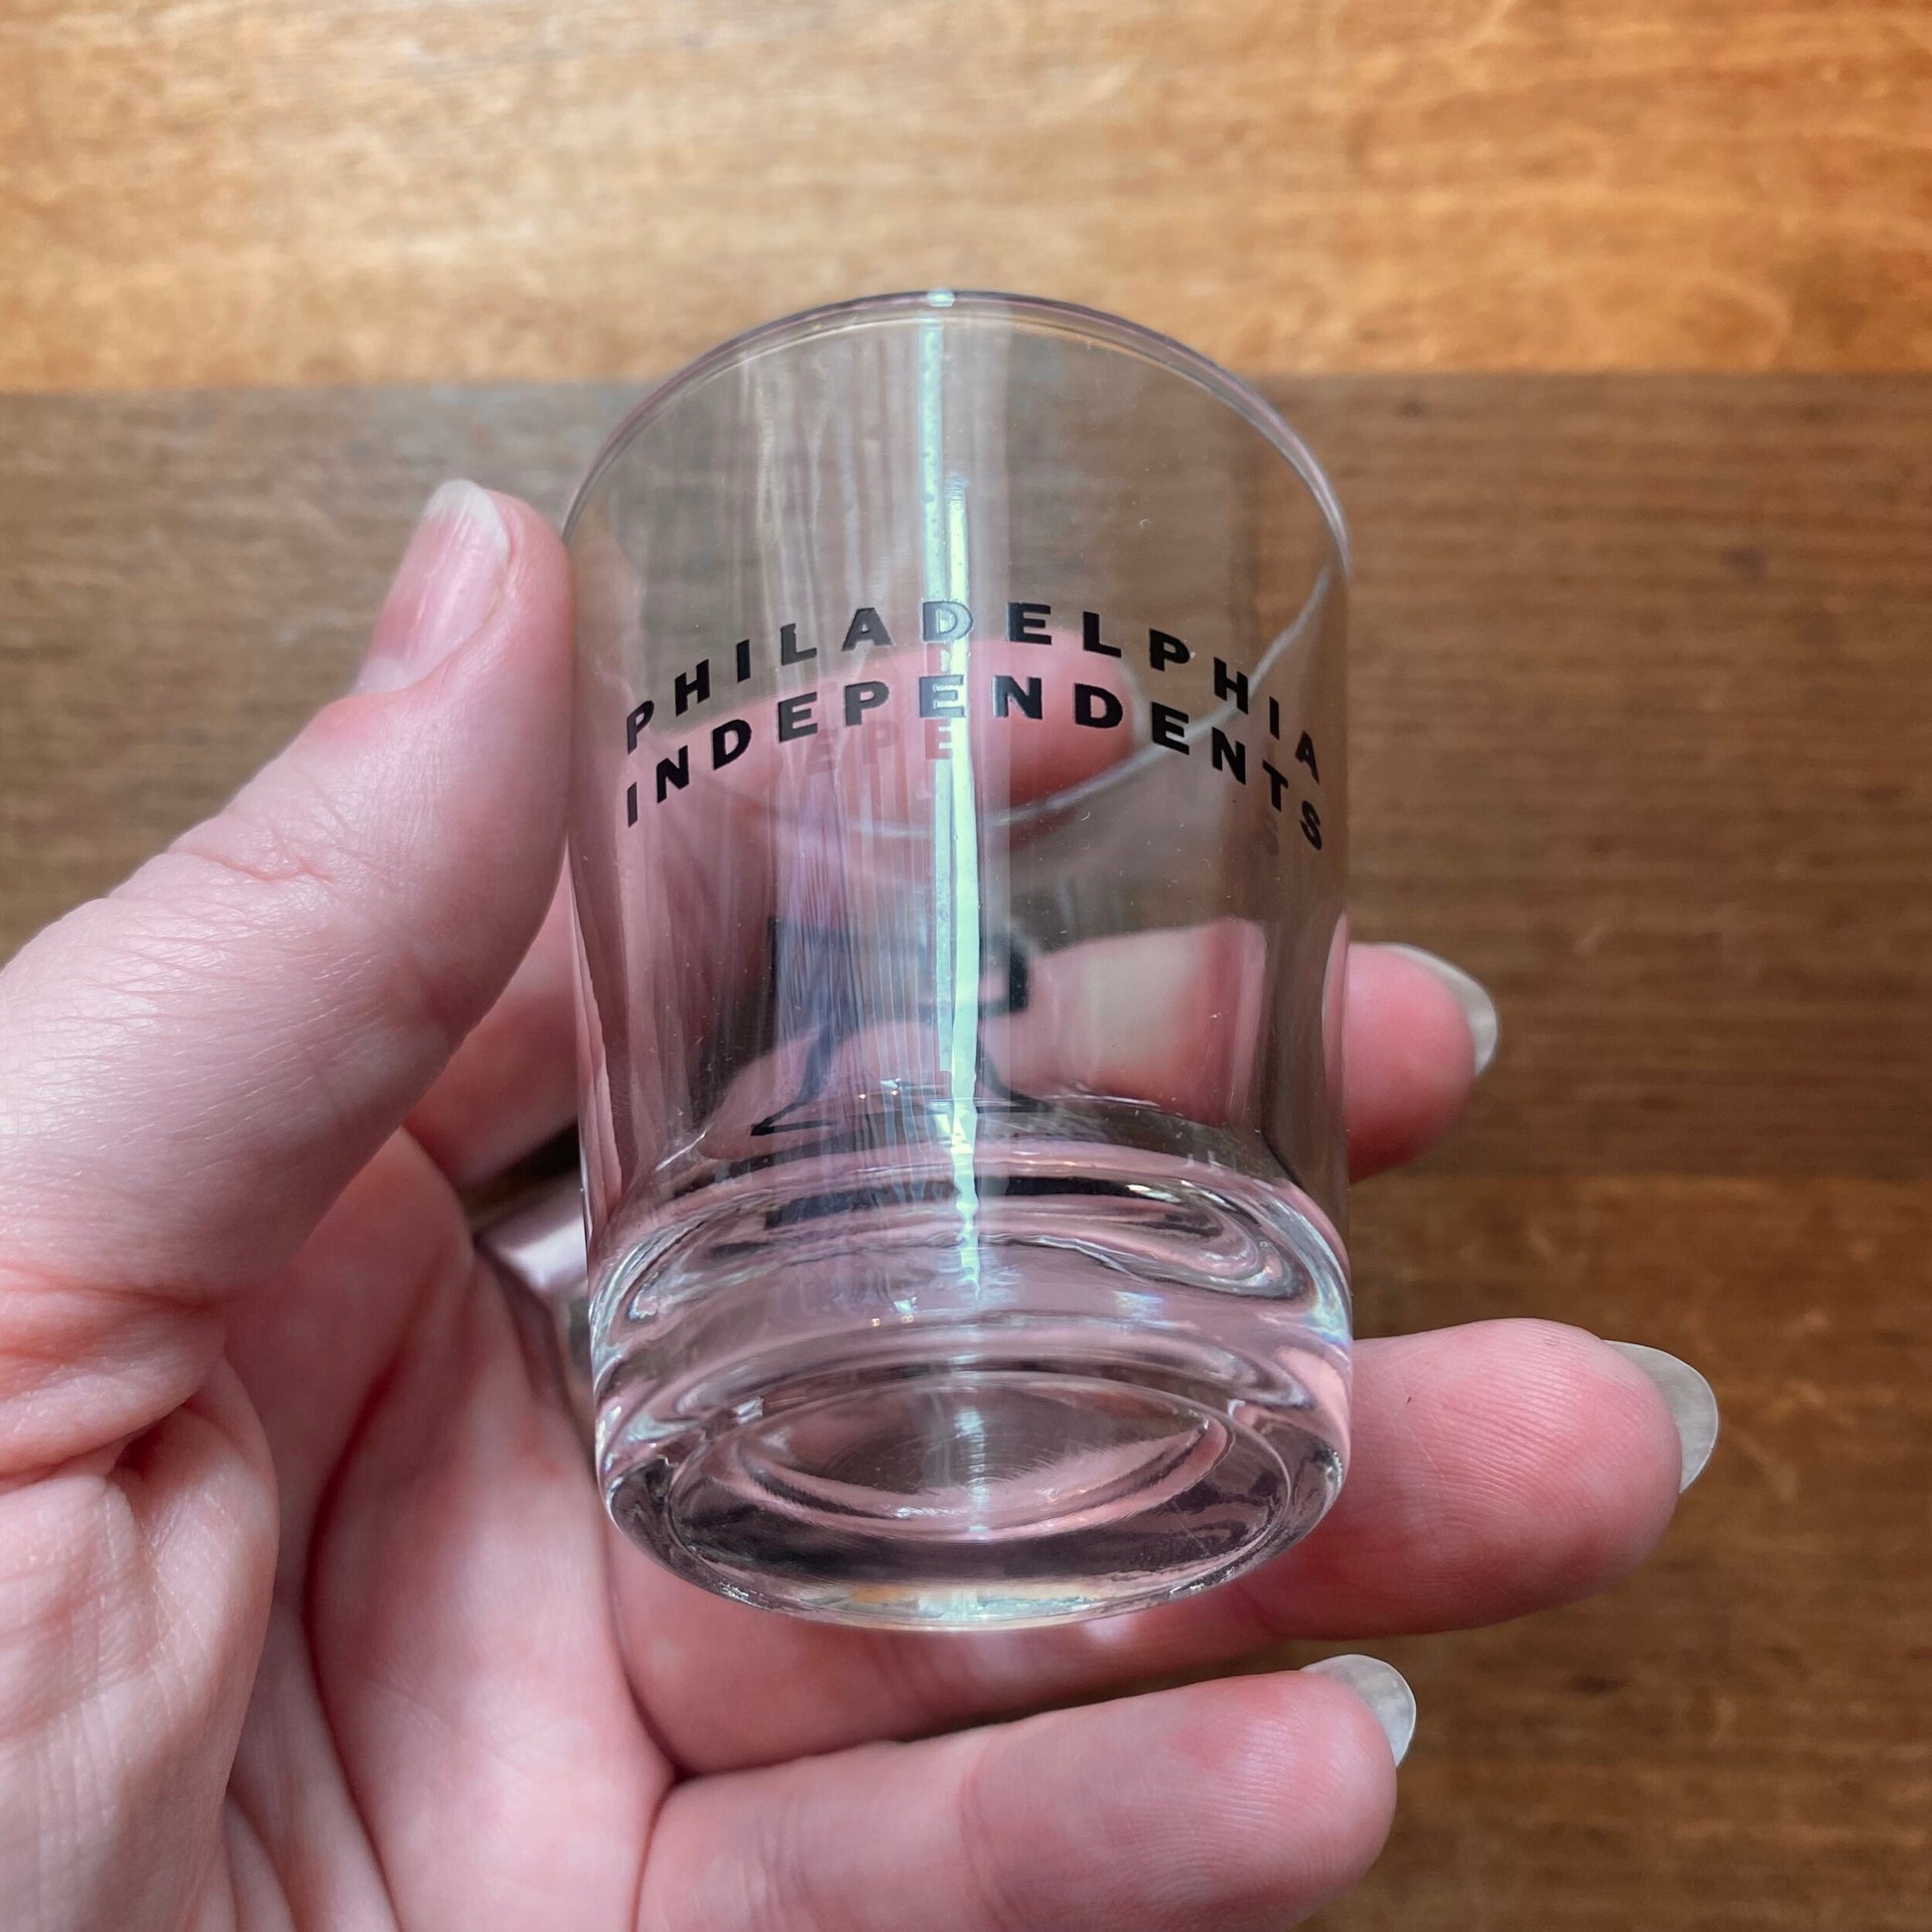 A hand holding a dishwasher safe Bell & Bolt shot glass with "Philadelphia Independents" text on it.